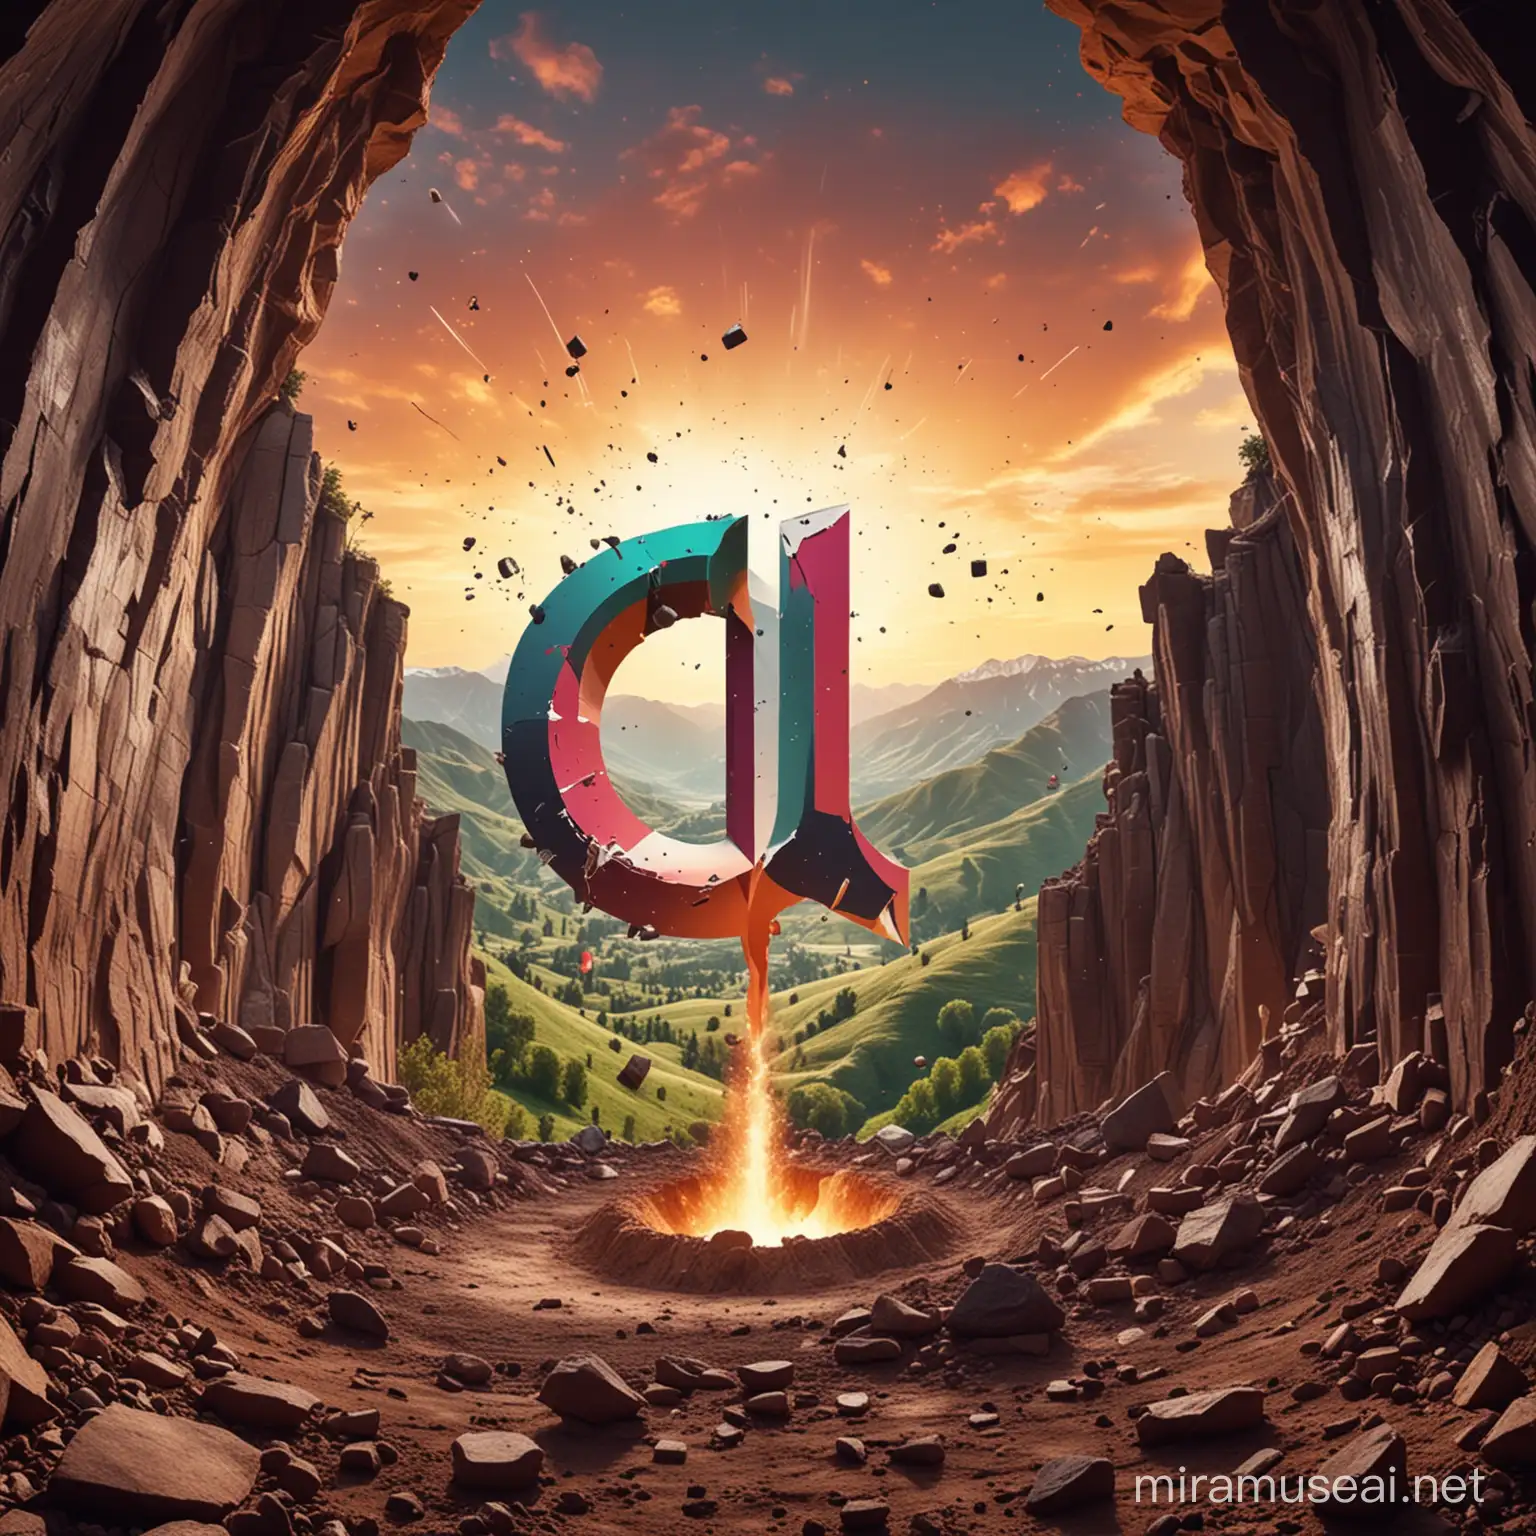 TikTok Logo Emerges from Valley with Explosive Impact